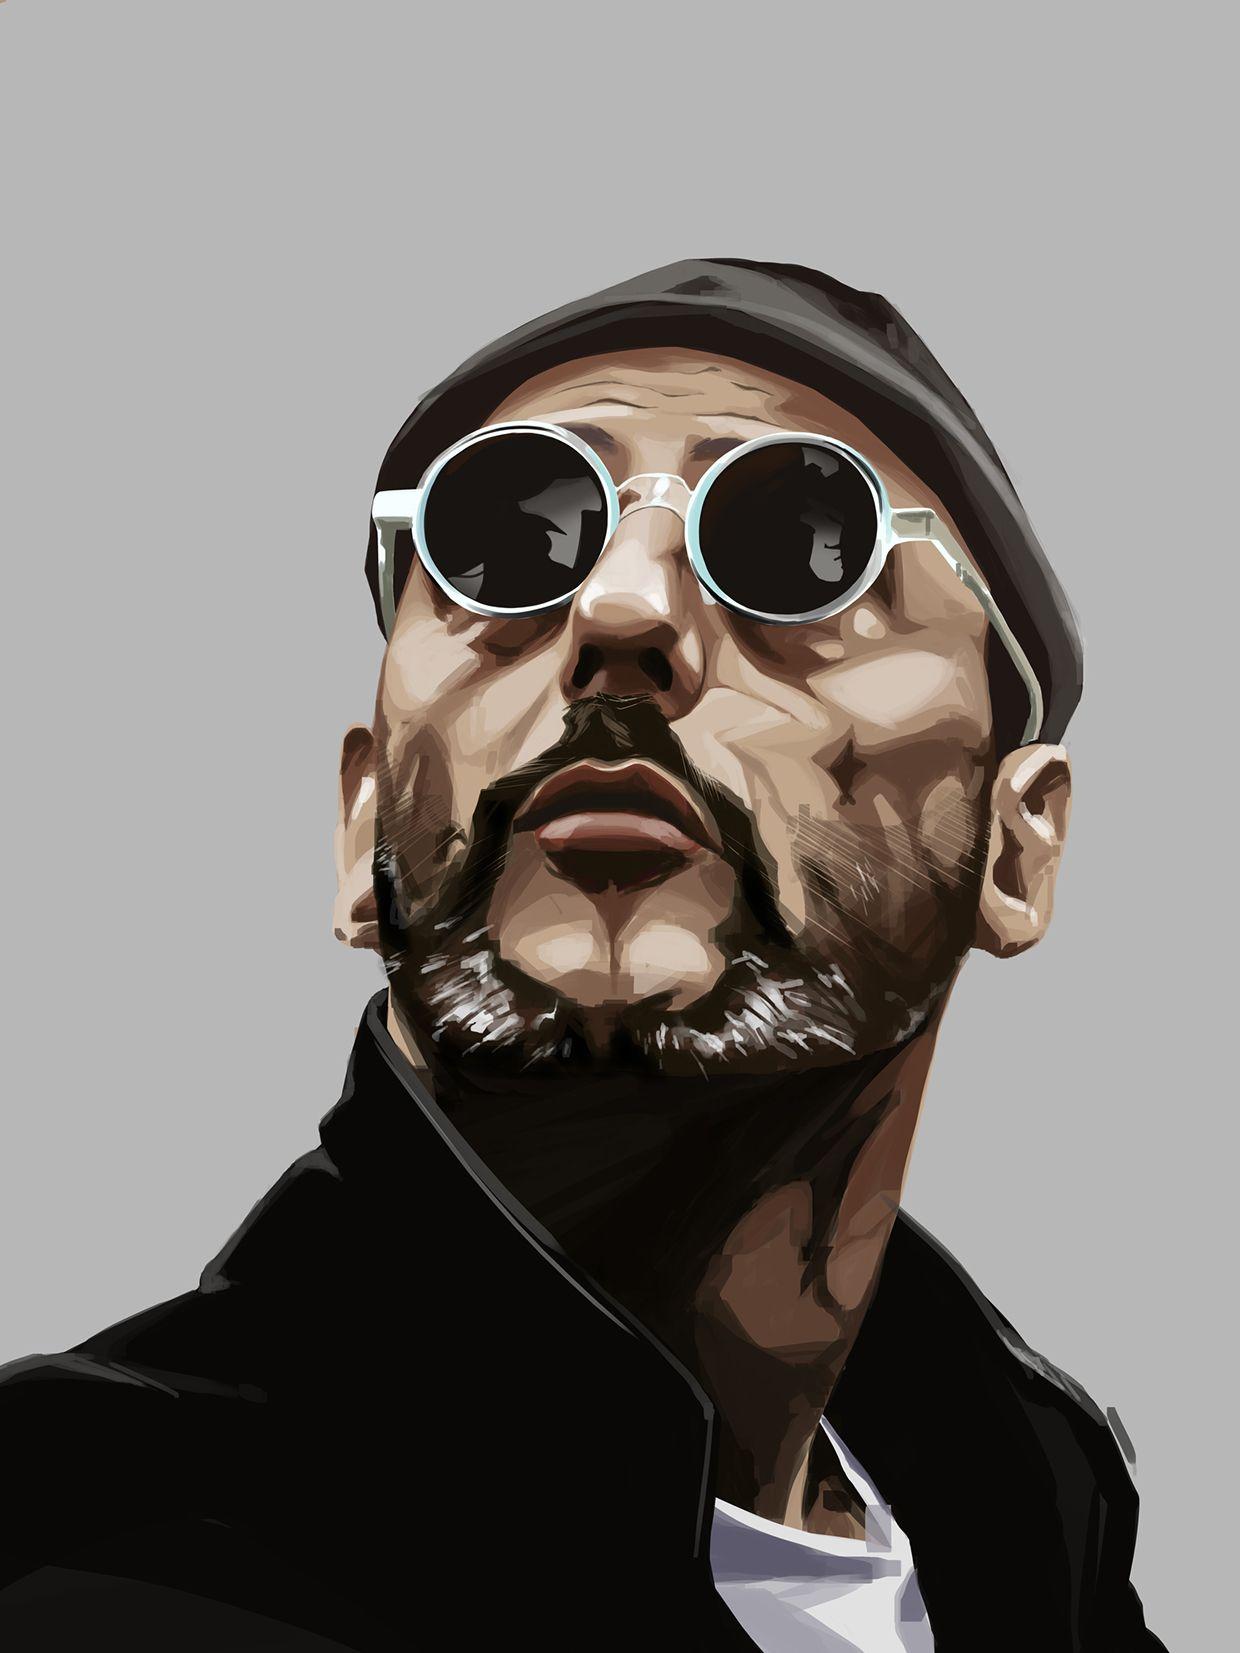 Leon the Professional Wallpapers - Top Free Leon the ...